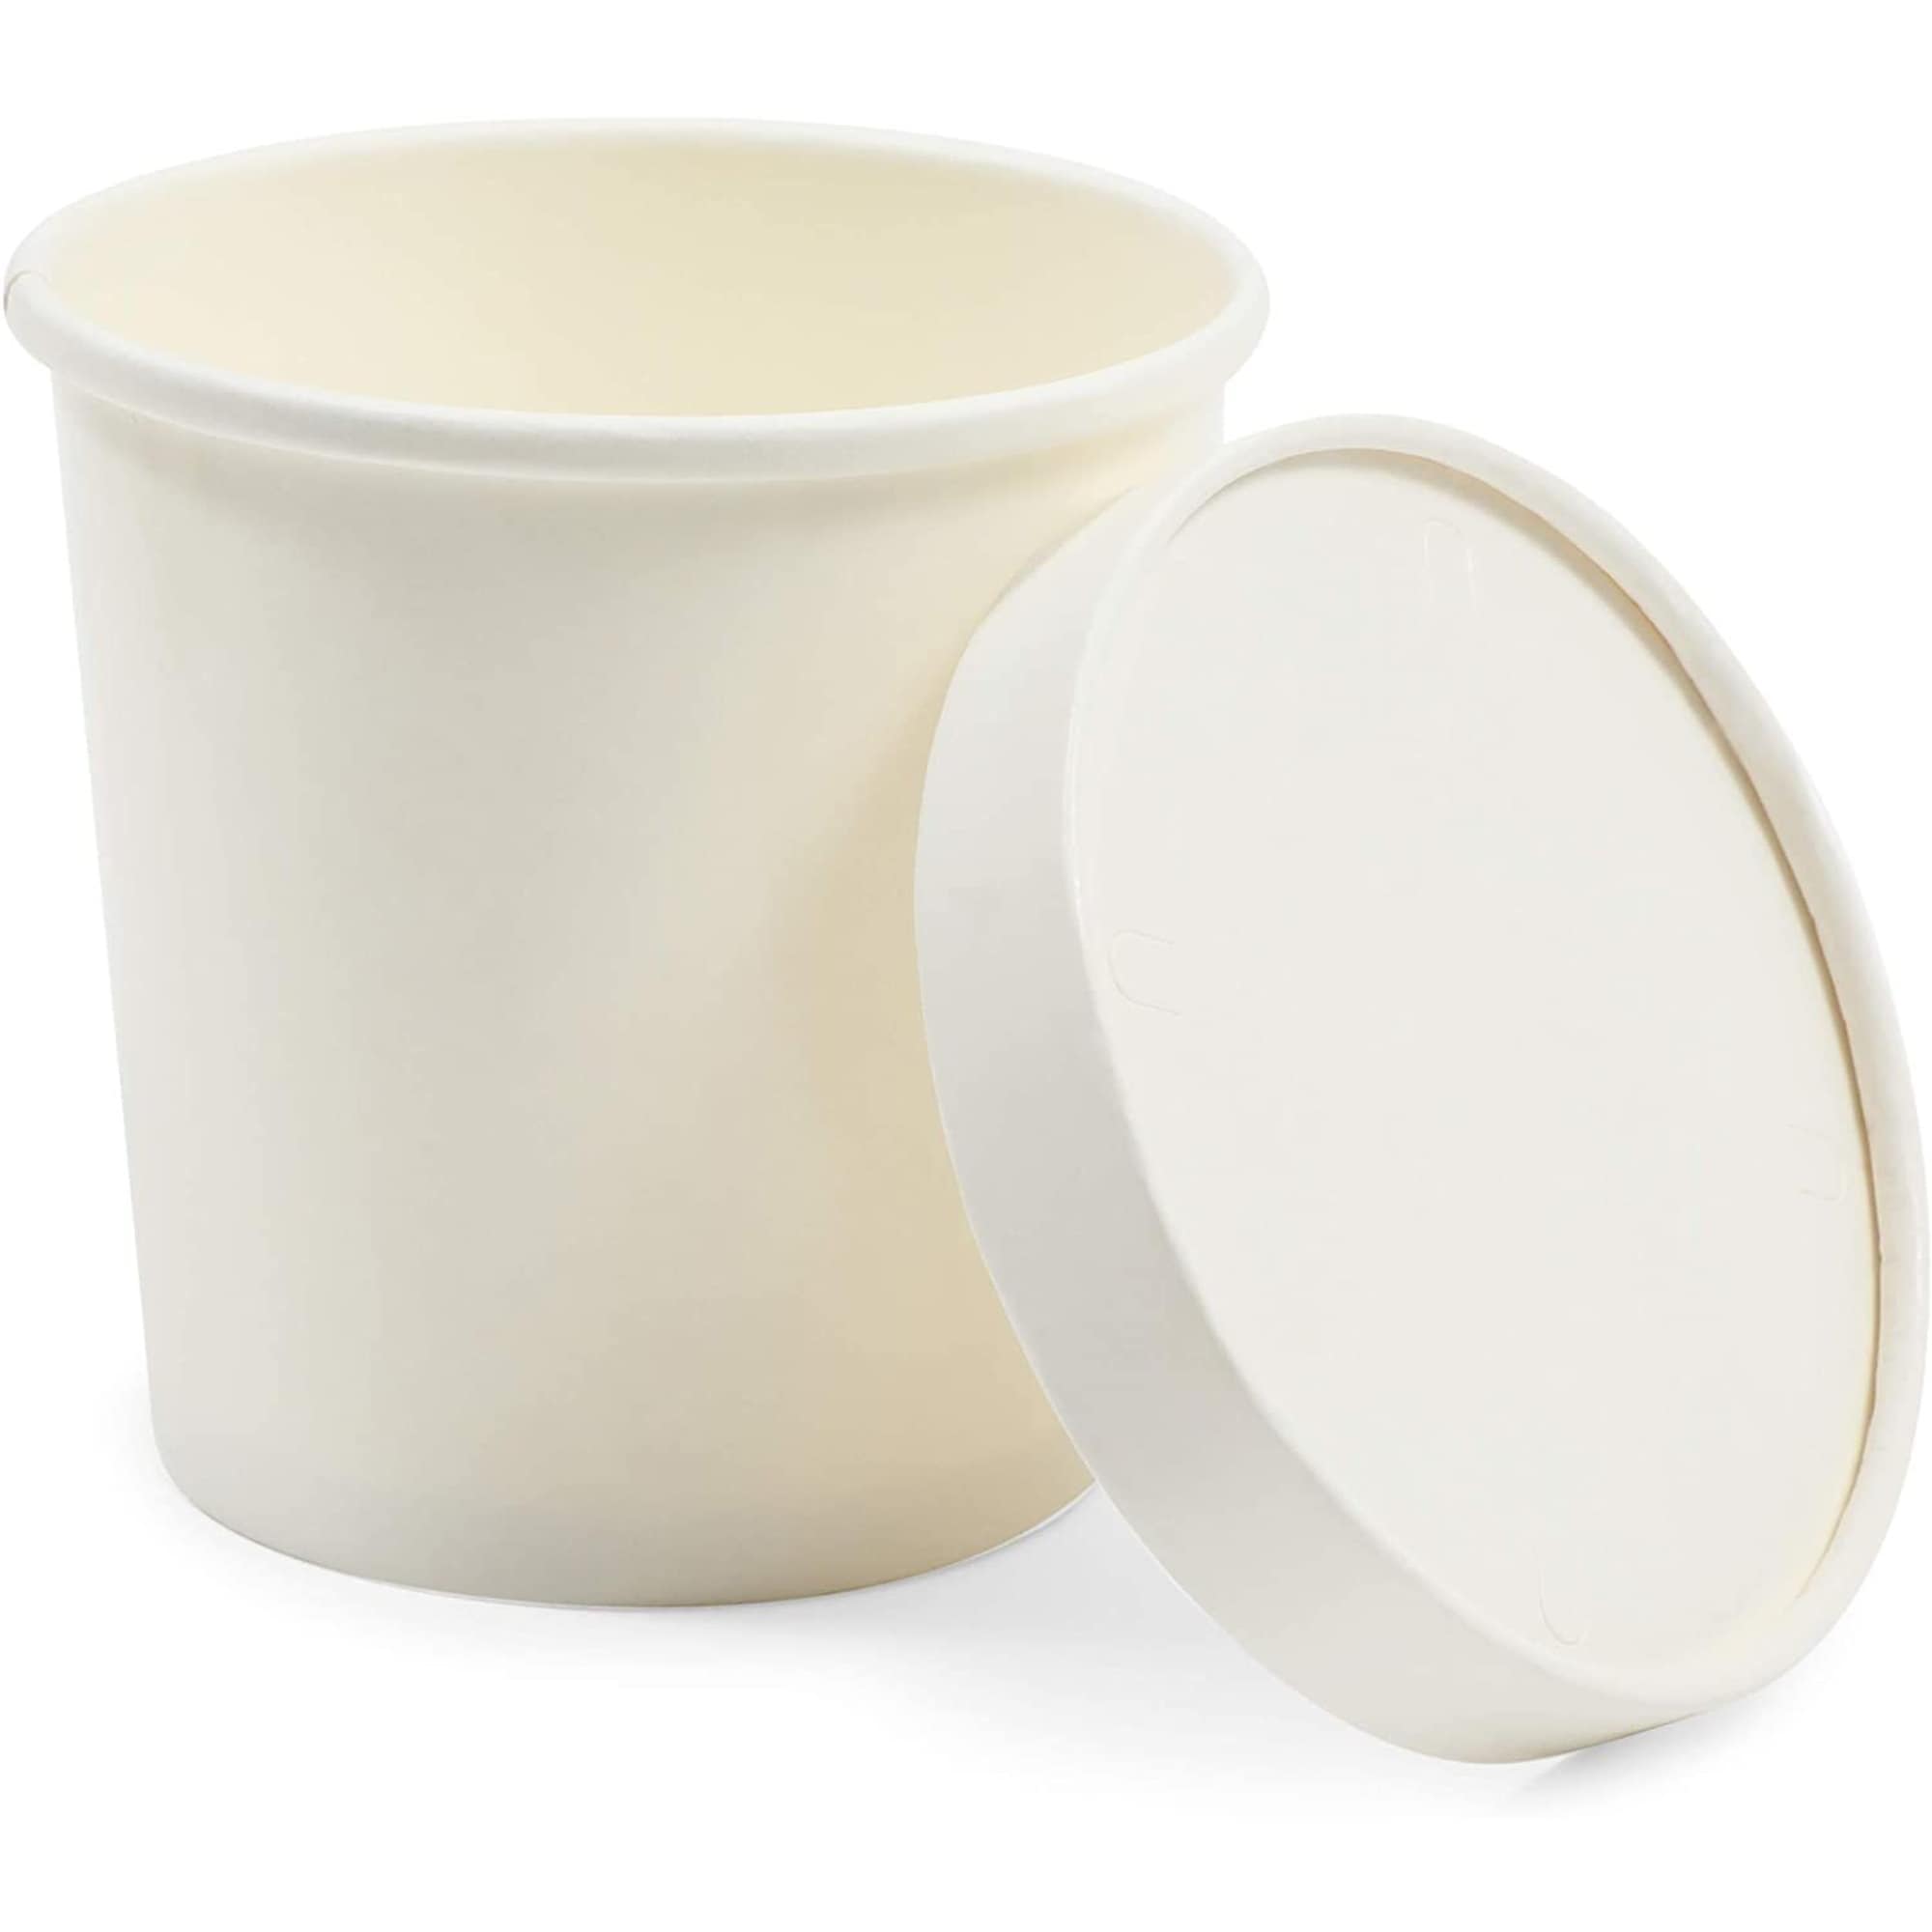 https://ak1.ostkcdn.com/images/products/is/images/direct/7f545fde91da60fe4031b6385ef55cf191ae6d5f/White-Disposable-Soup-Containers-with-Lids-for-To-Go-Food-%2816-oz%2C-36-Pack%29.jpg